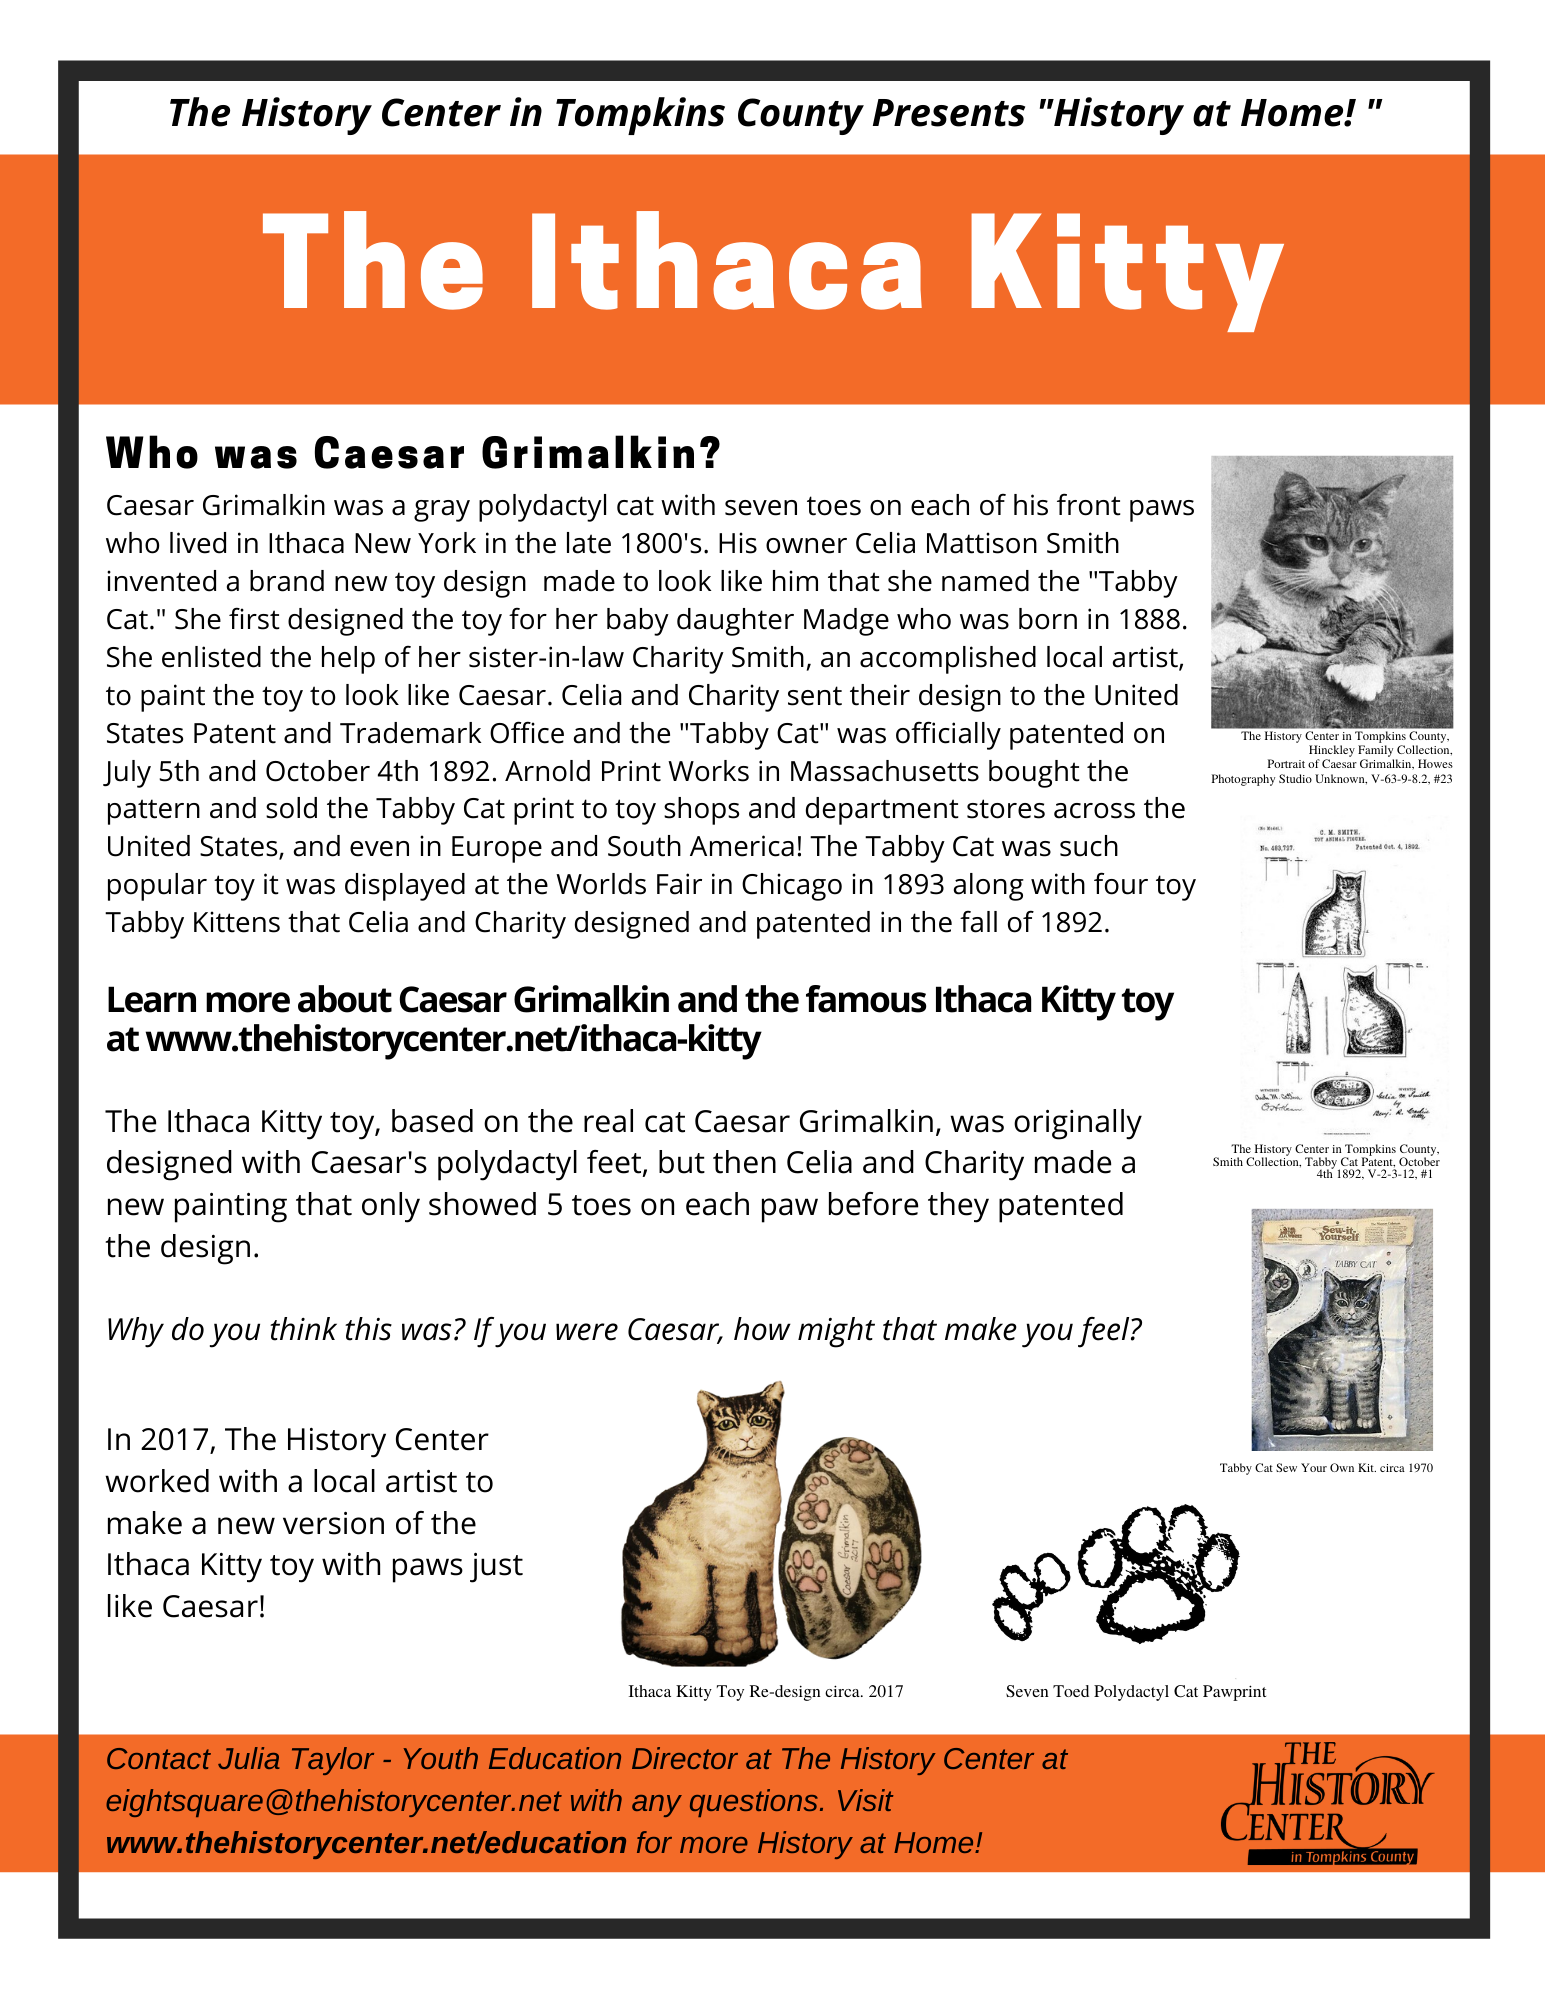 A link/image to a downloadable activity called "The Ithaca Kitty"